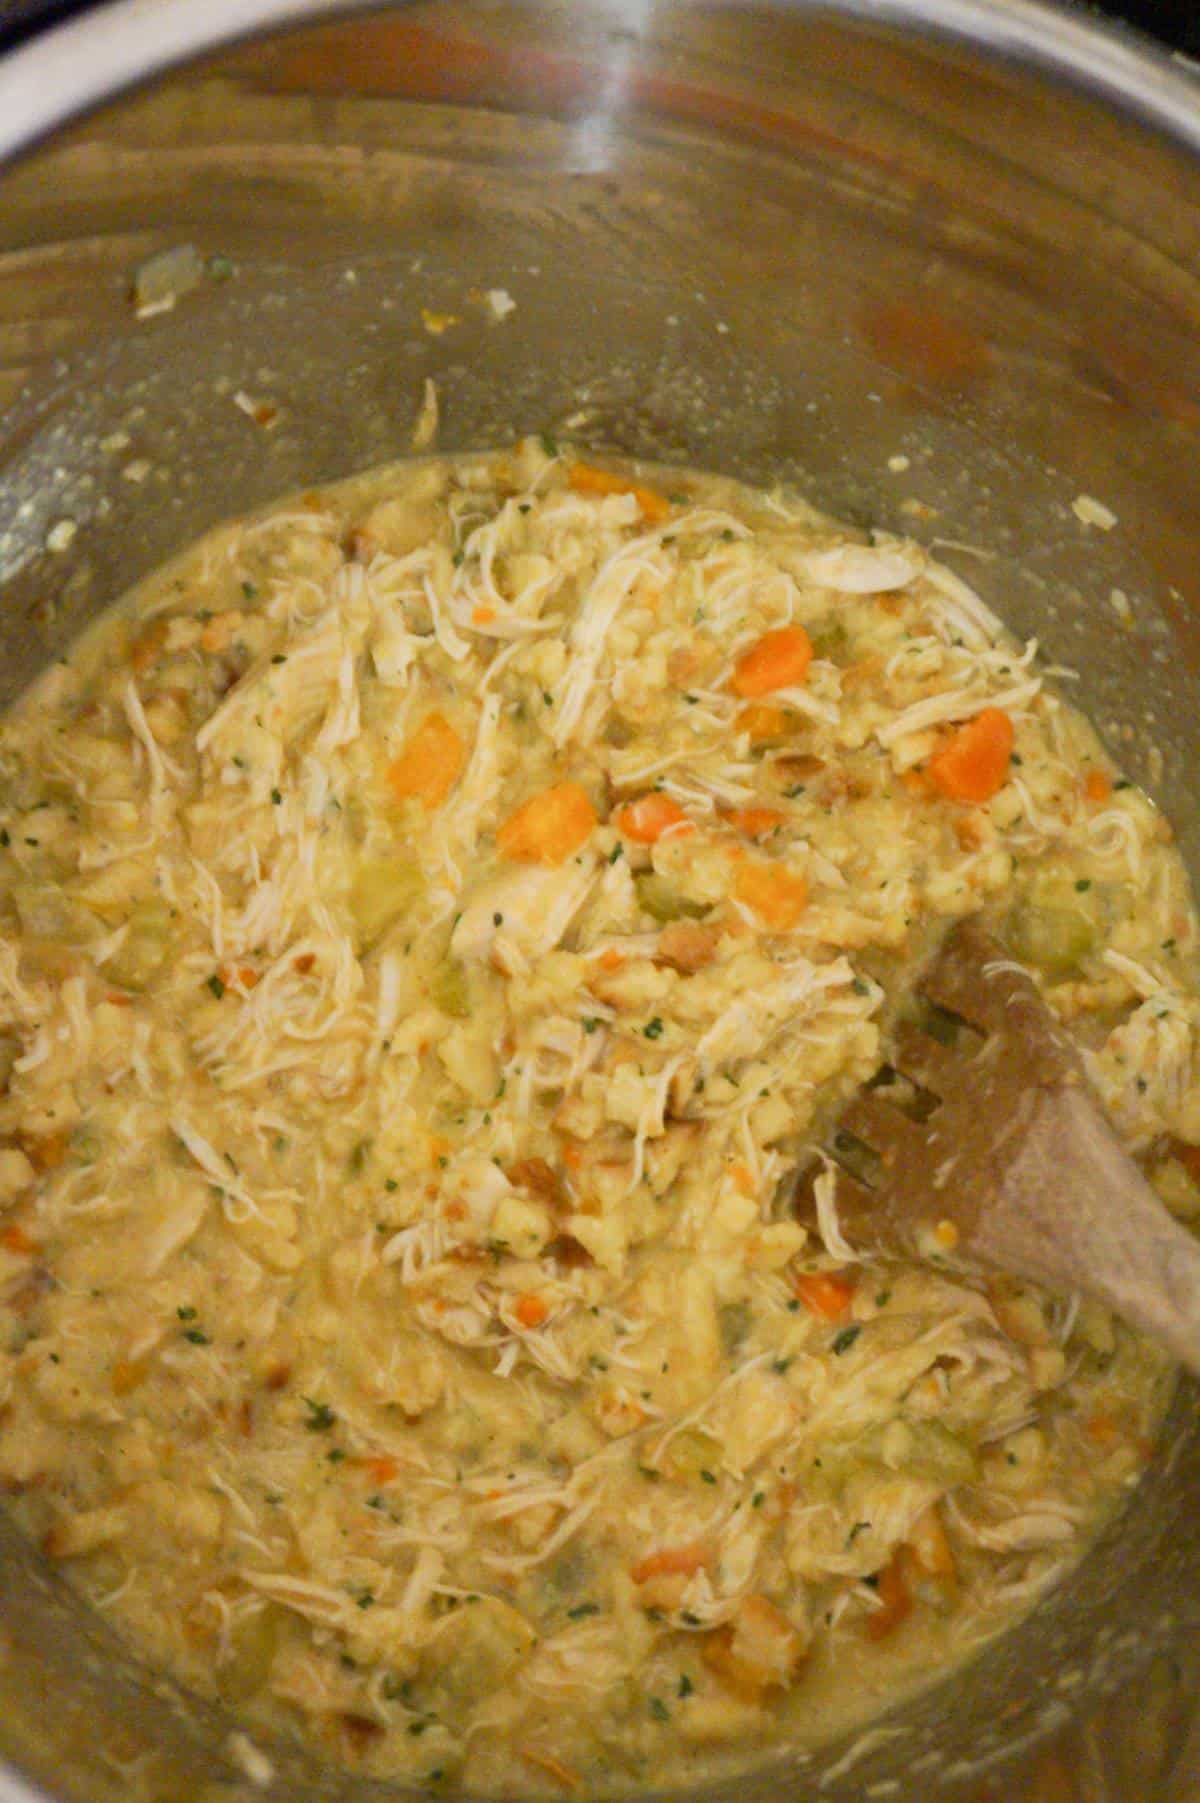 shredded chicken and veggies in an Instant Pot